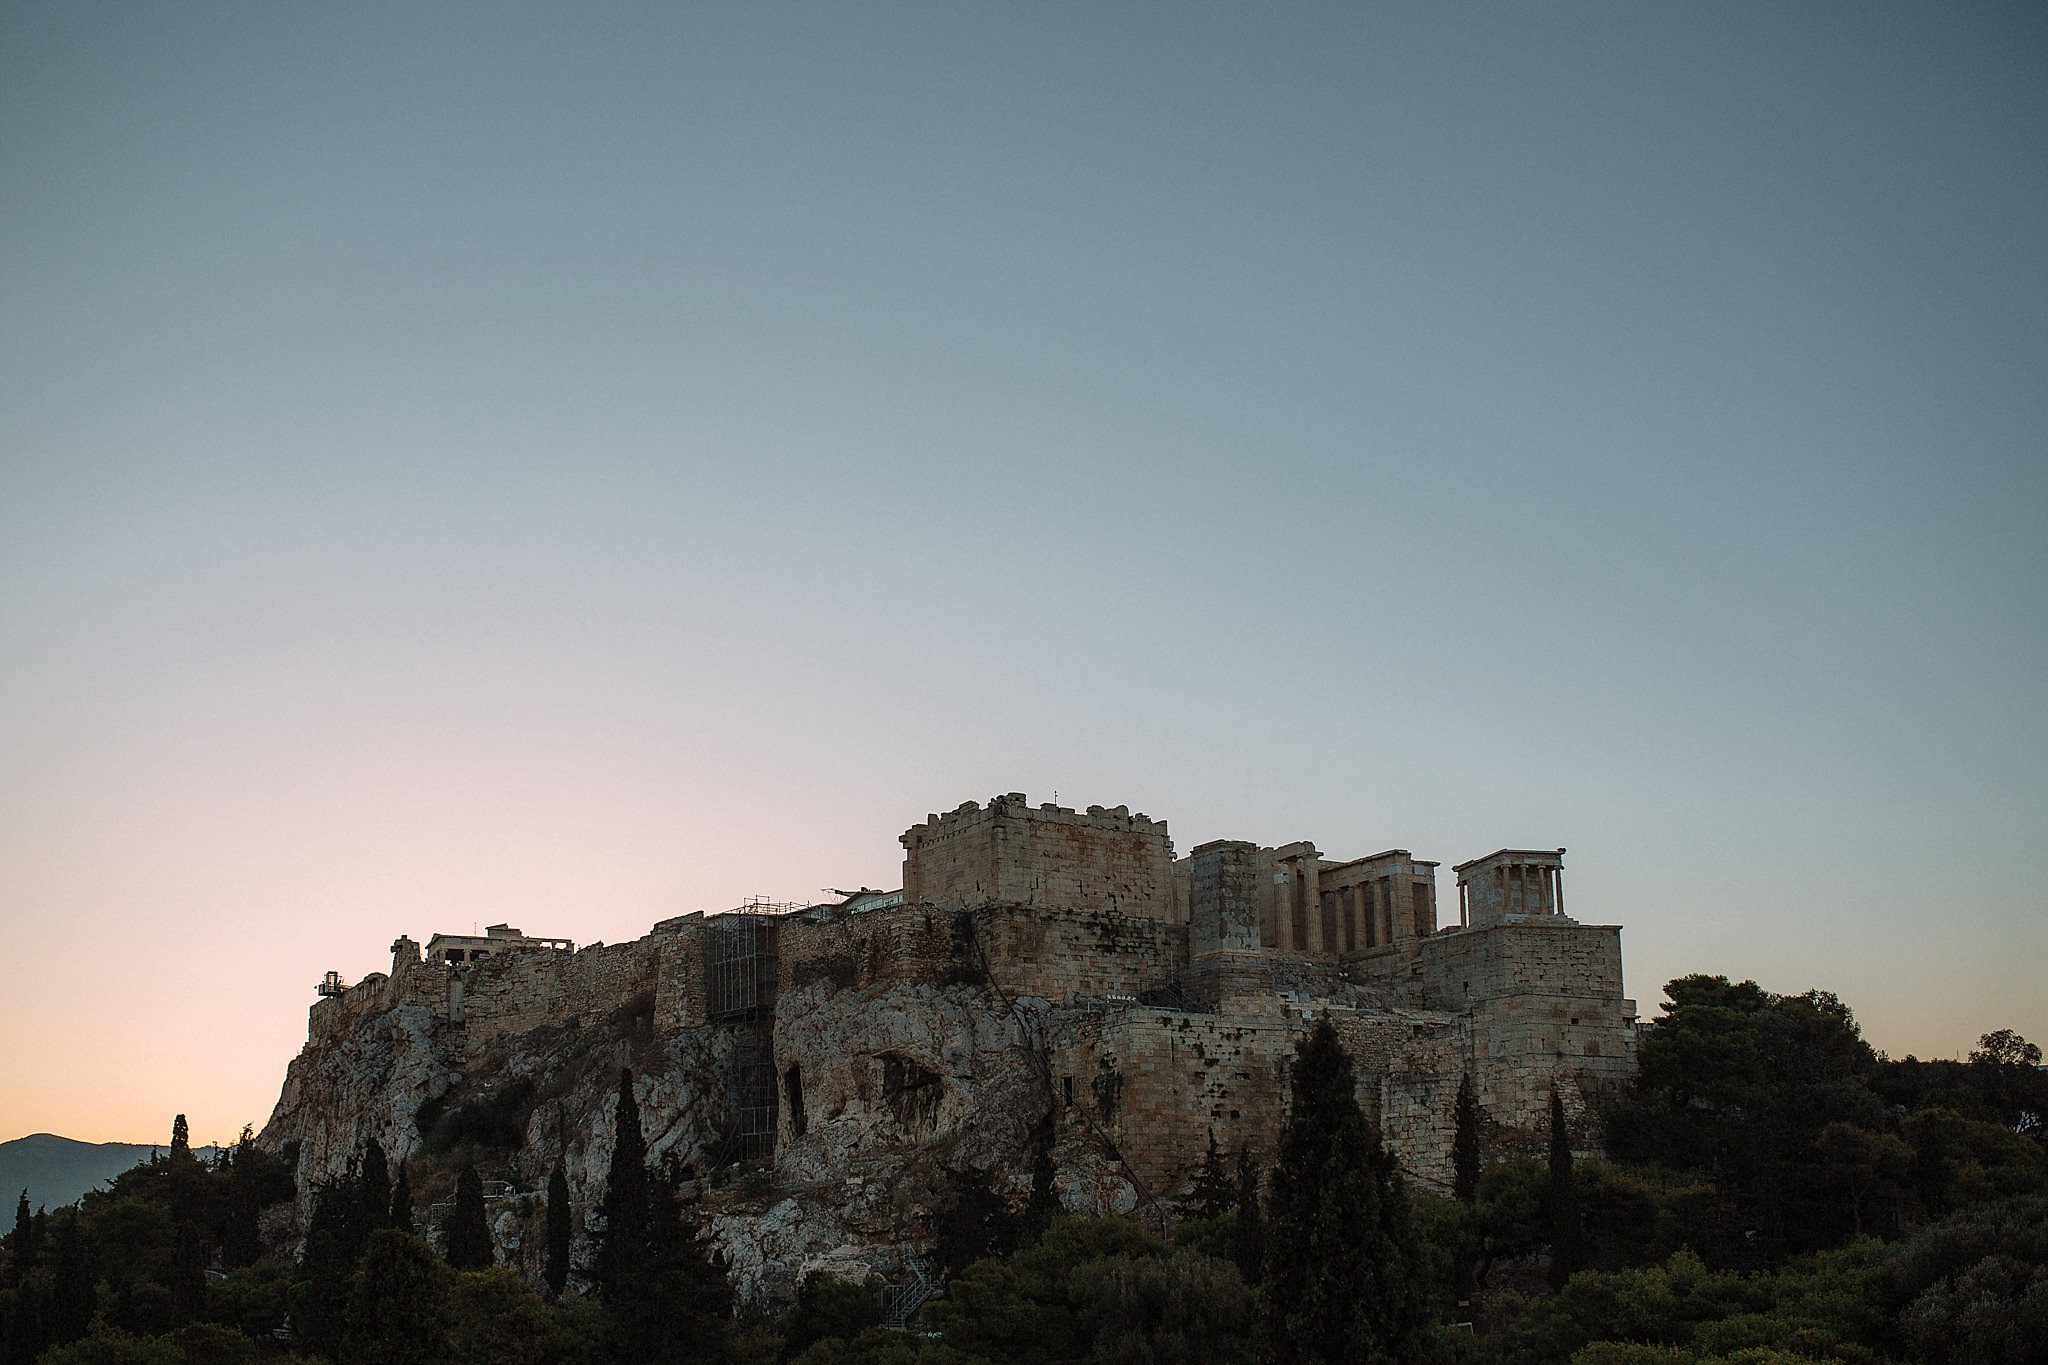   The Acropolis from Areopagus Hill again, the next morning  